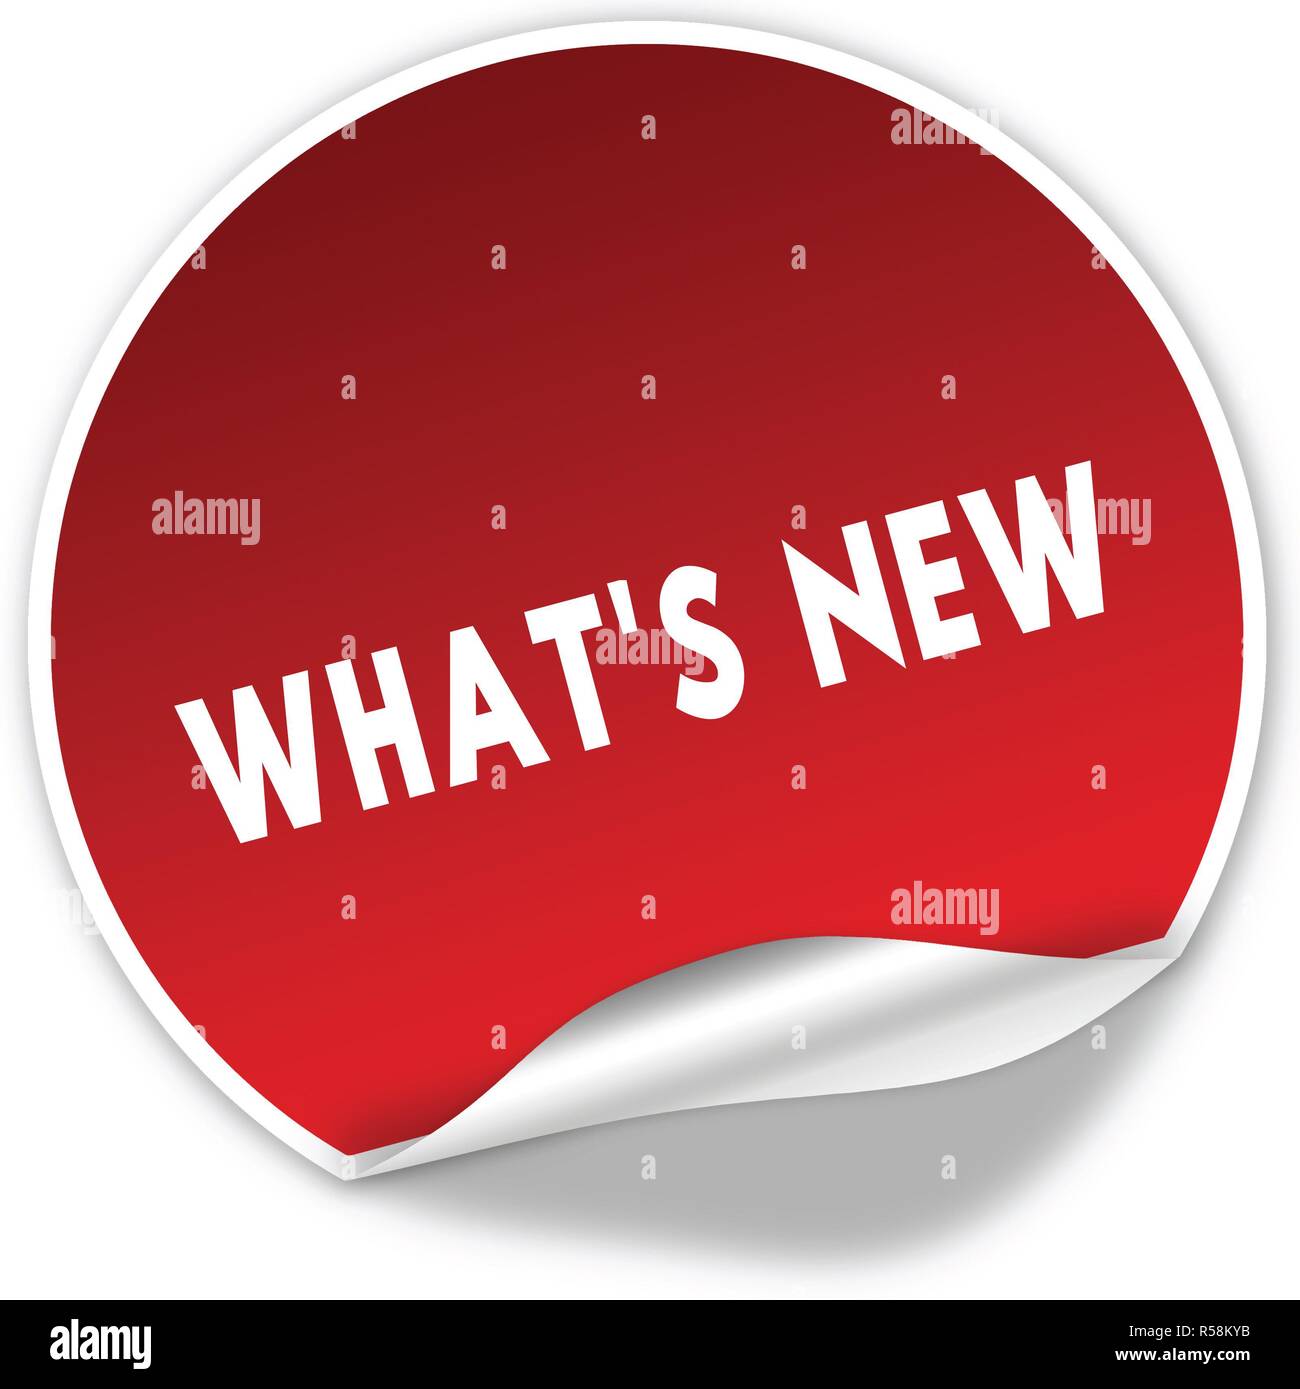 WHAT IS NEW text on realistic red sticker on white background. Stock Photo